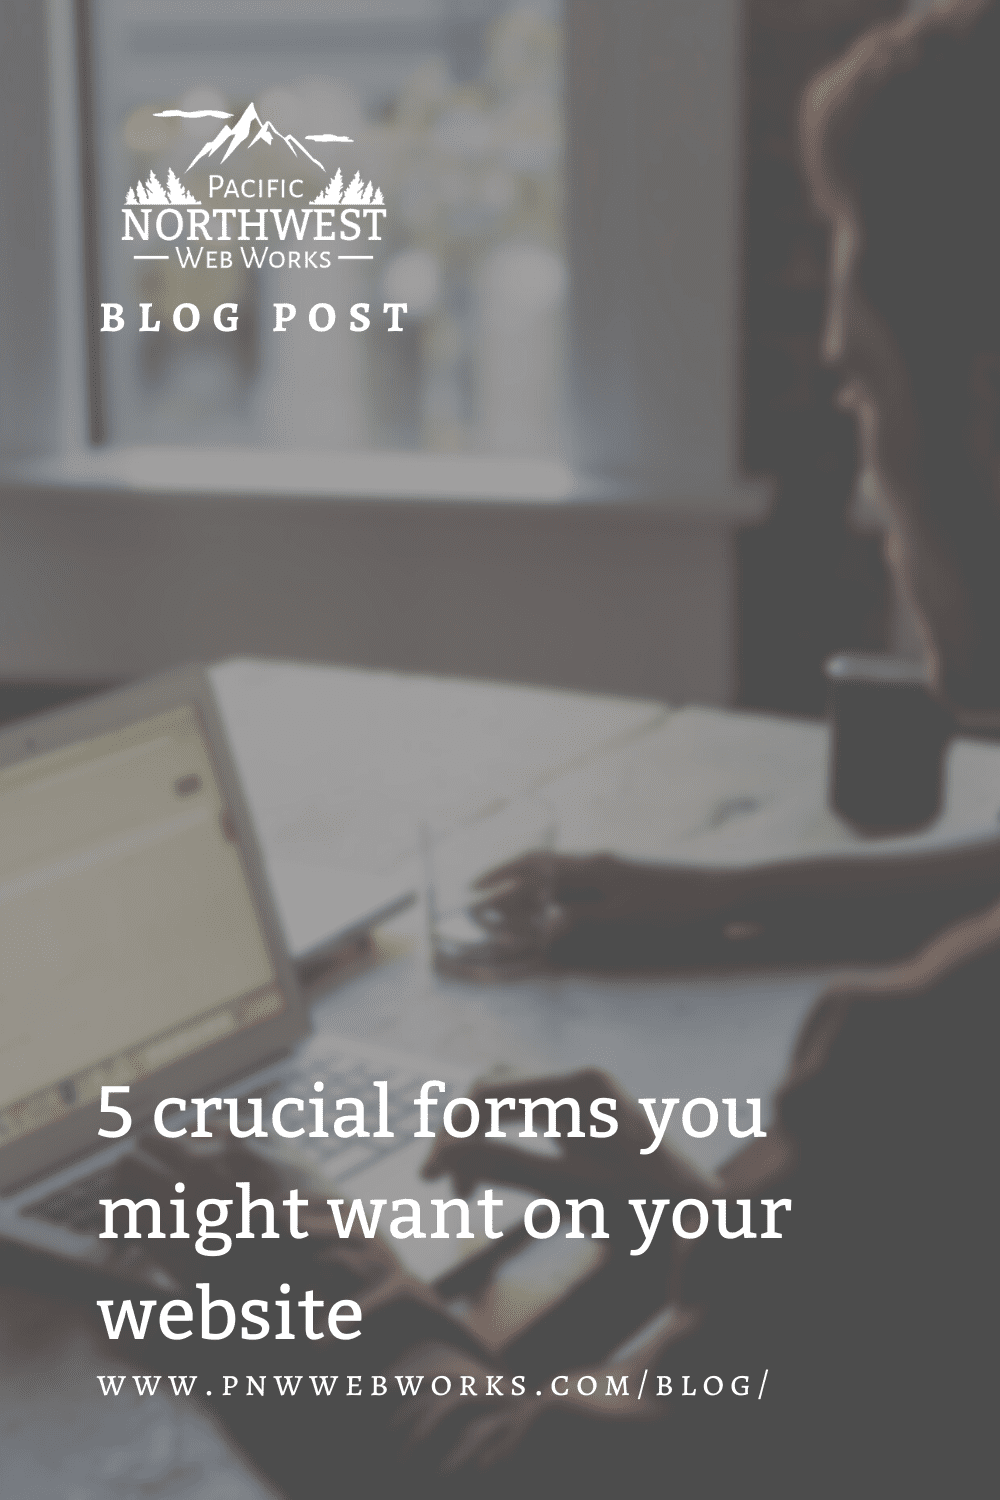 5 crucial forms you might want on your website